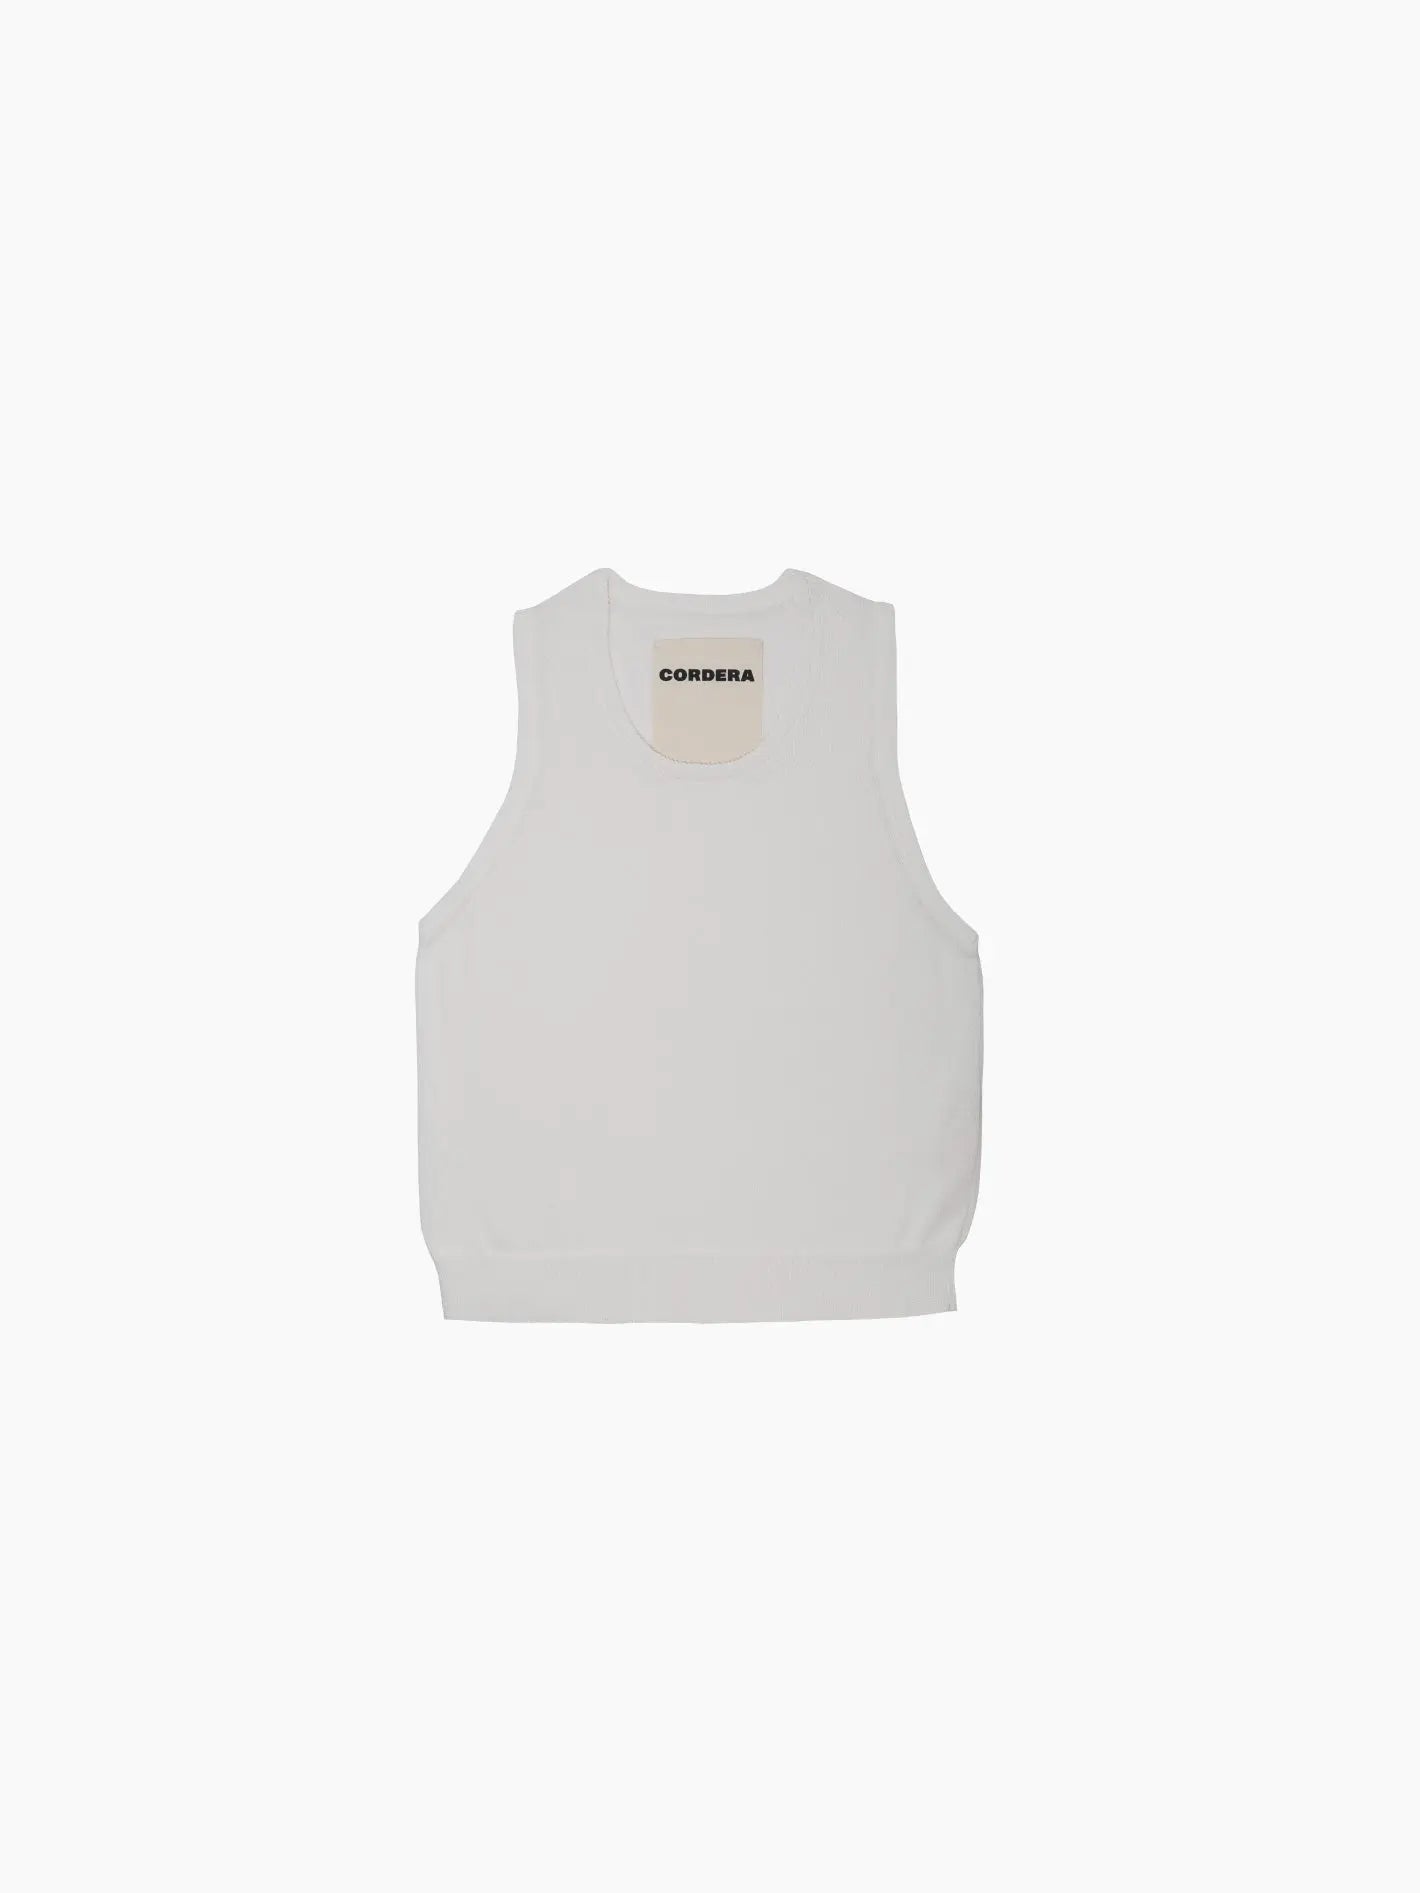 A sleeveless white Cotton Cropped Tank Top shown from the front against a plain white background. The Cotton Cropped Tank Top features a crew neckline, with the brand name "Cordera" visible on the tag inside the collar. Available exclusively at Bassalstore in Barcelona.